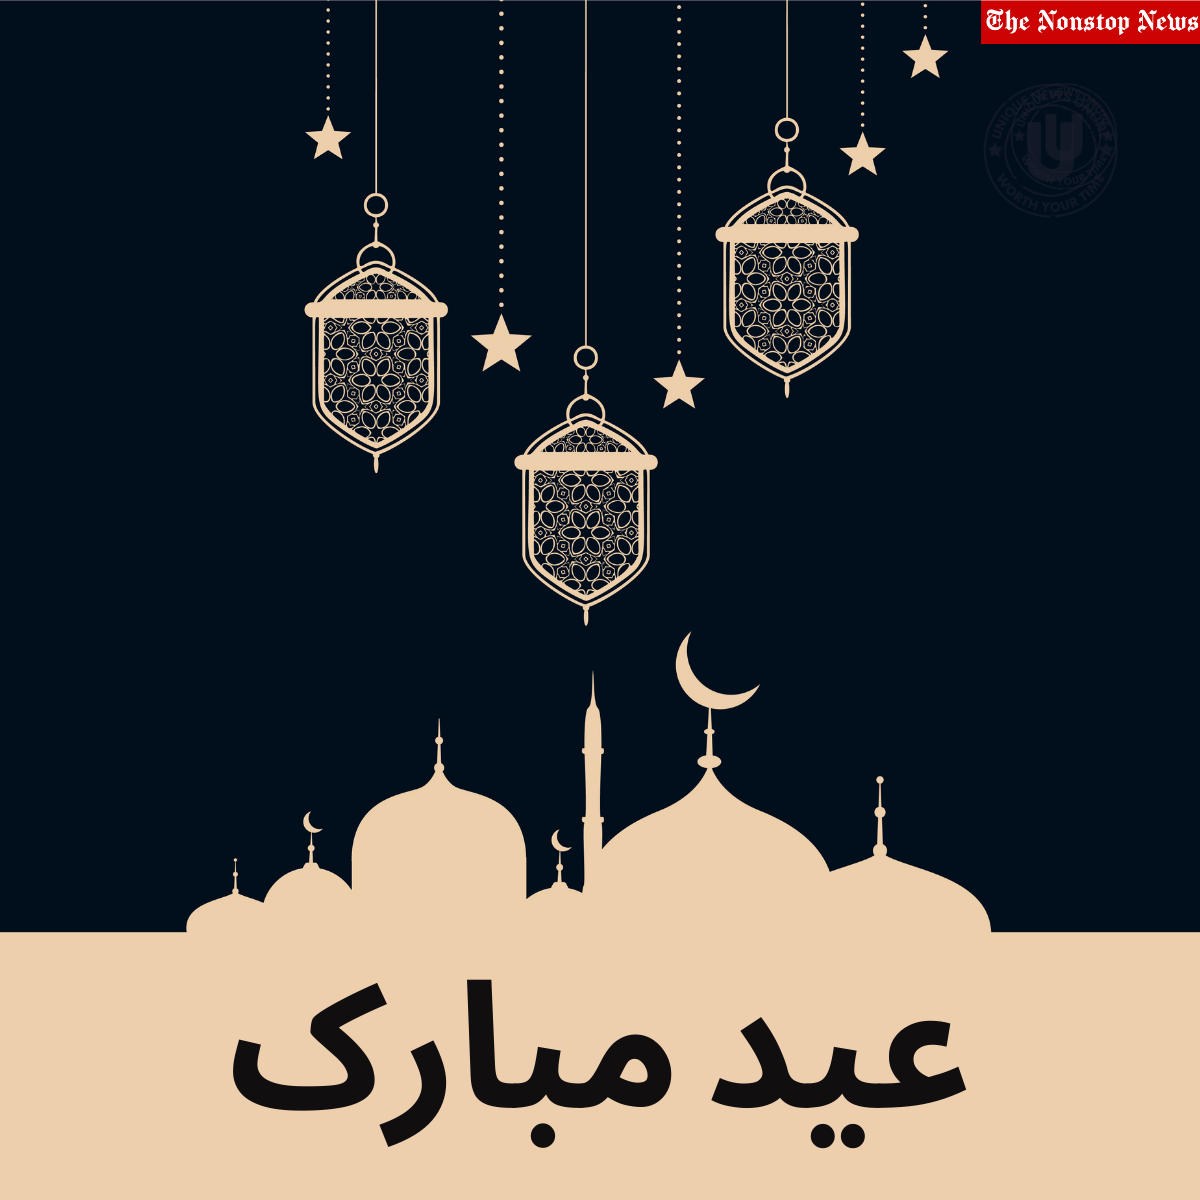 Happy Eid Ul-Adha Mubarak 2022: Urdu Quotes, Wallpaper, Wishes, Images, DP, Shayari, Greetings, Messages, Posters, to Share